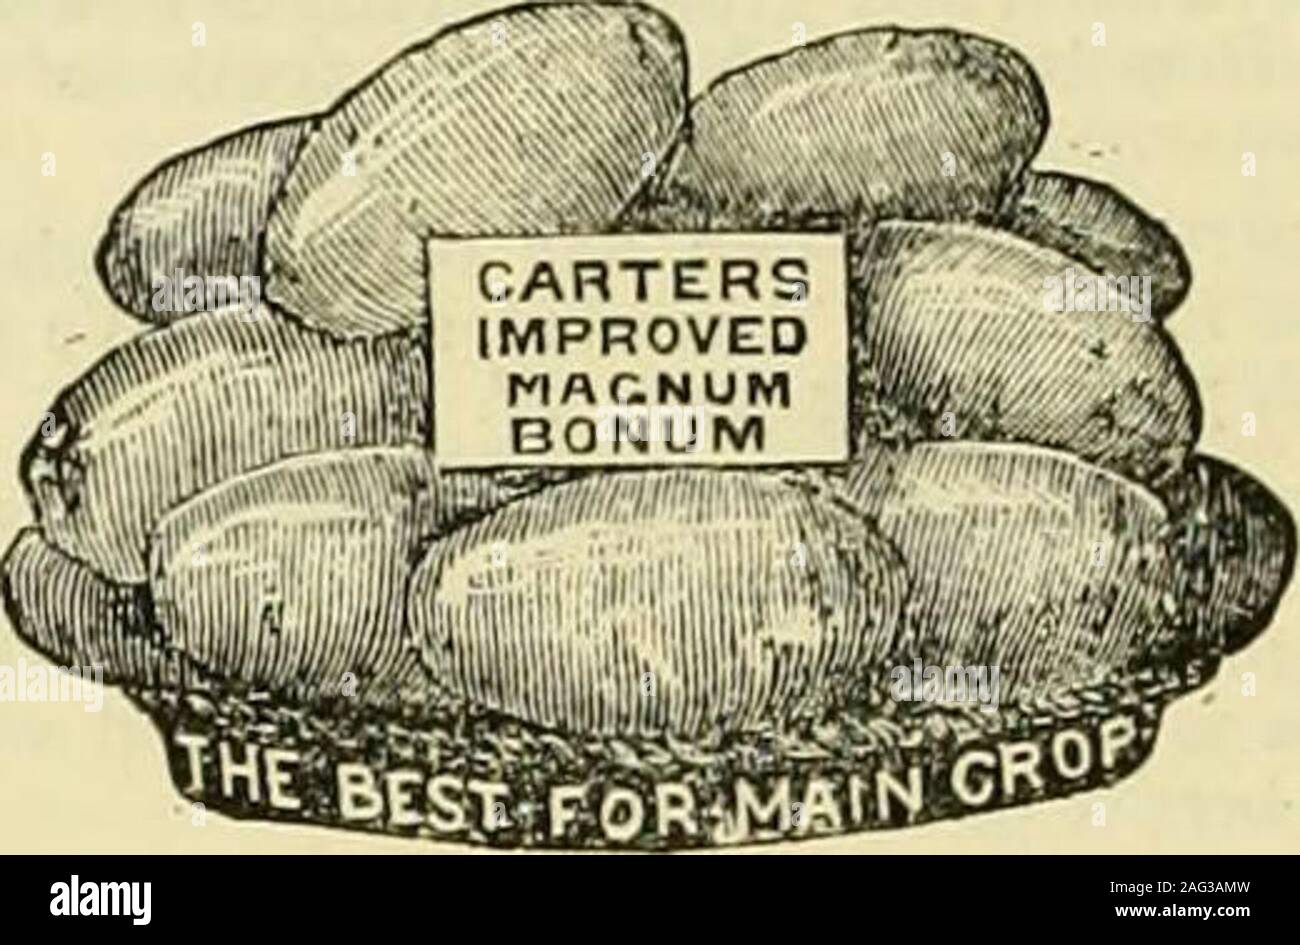 . The Gardeners' chronicle : a weekly illustrated journal of horticulture and allied subjects. ^0^ POTATOS FOR PLANTING.. IMPORTANT CAUTION This variety was selected from the old MAGNUM EONUMpurchased in 1877 by Messrs. Carter direct from the raiser,Mr. Clarke. Messrs. Carter find it necessary to issue thiscaution, as it has come to their knowledge that Potatos havebeen sold as CARTERSIMPROVED IMAGNUM BONUM,but which were a spurious and very inferior kind. EarlyOrders recommended. Price, per Sack, 33s.; per Bushel, 12s.Much cheaper per Ton and Half Ton. Stock Photo